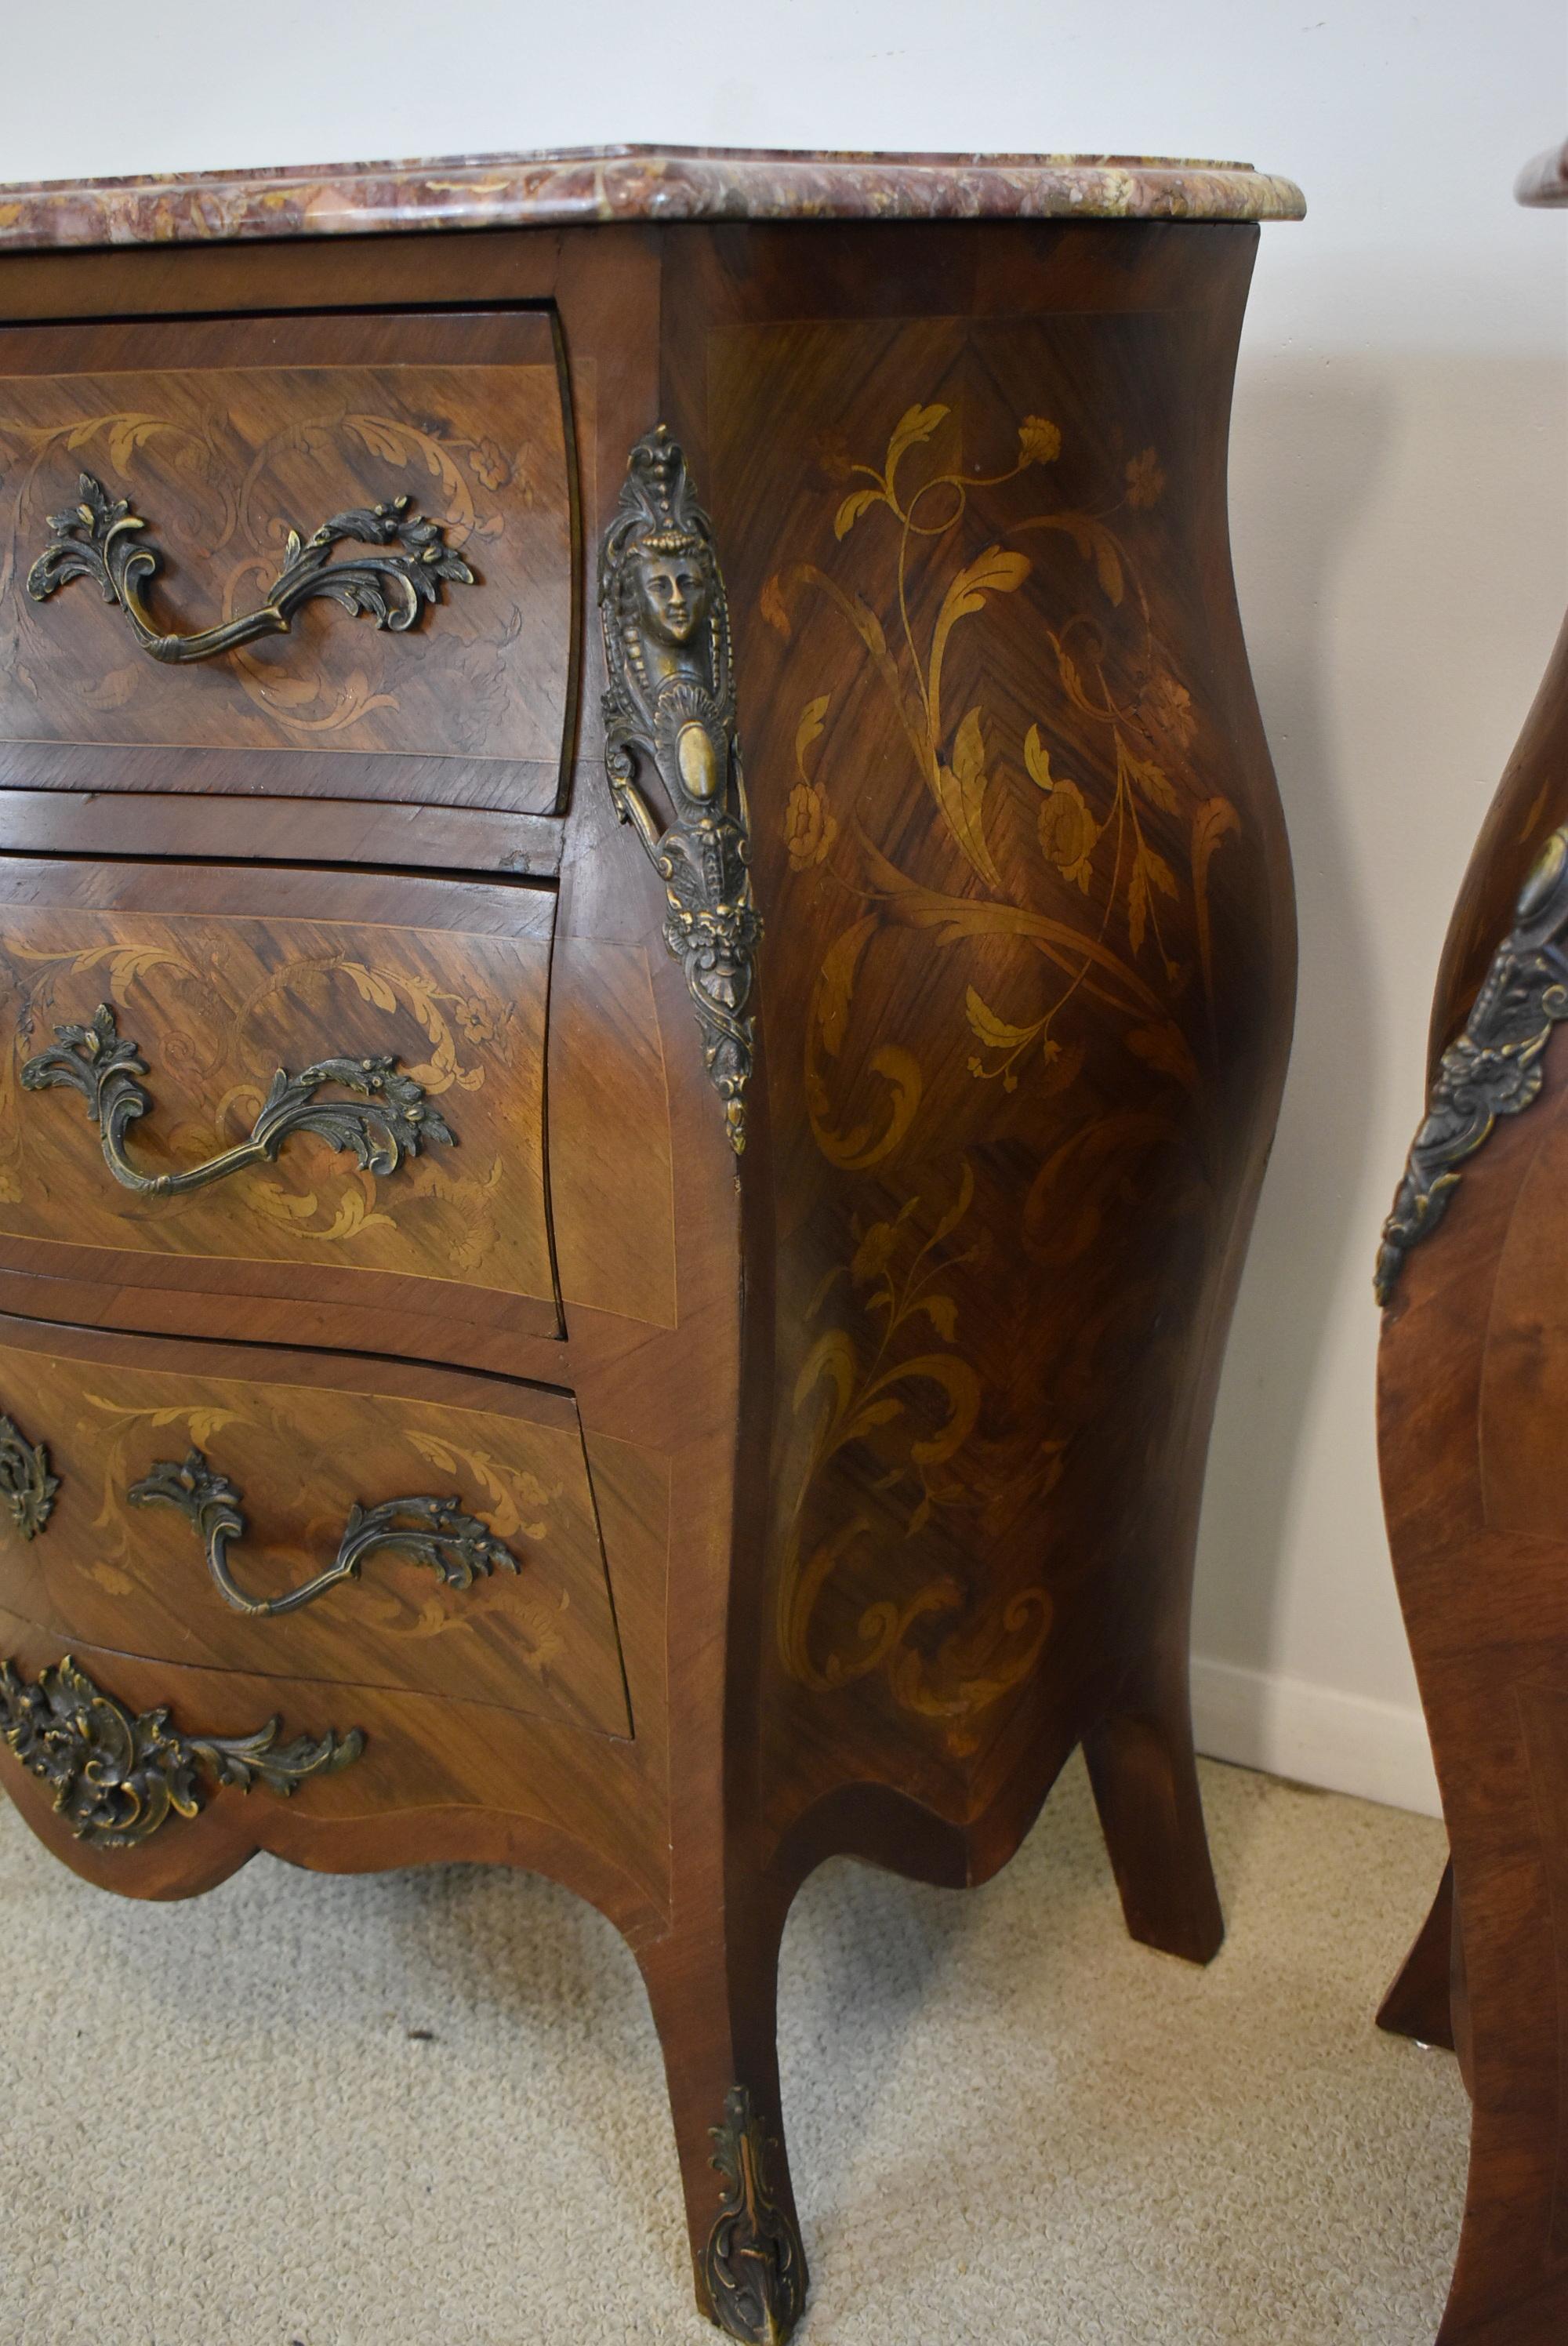 A pair of mid 20th century French Louis XV style Bombay commodes. Walnut and tulipwood construction with great marquetry inlaid foliate detail on the drawers and sides cast Bronze handles and mounts. Each commode has three dovetailed drawers and